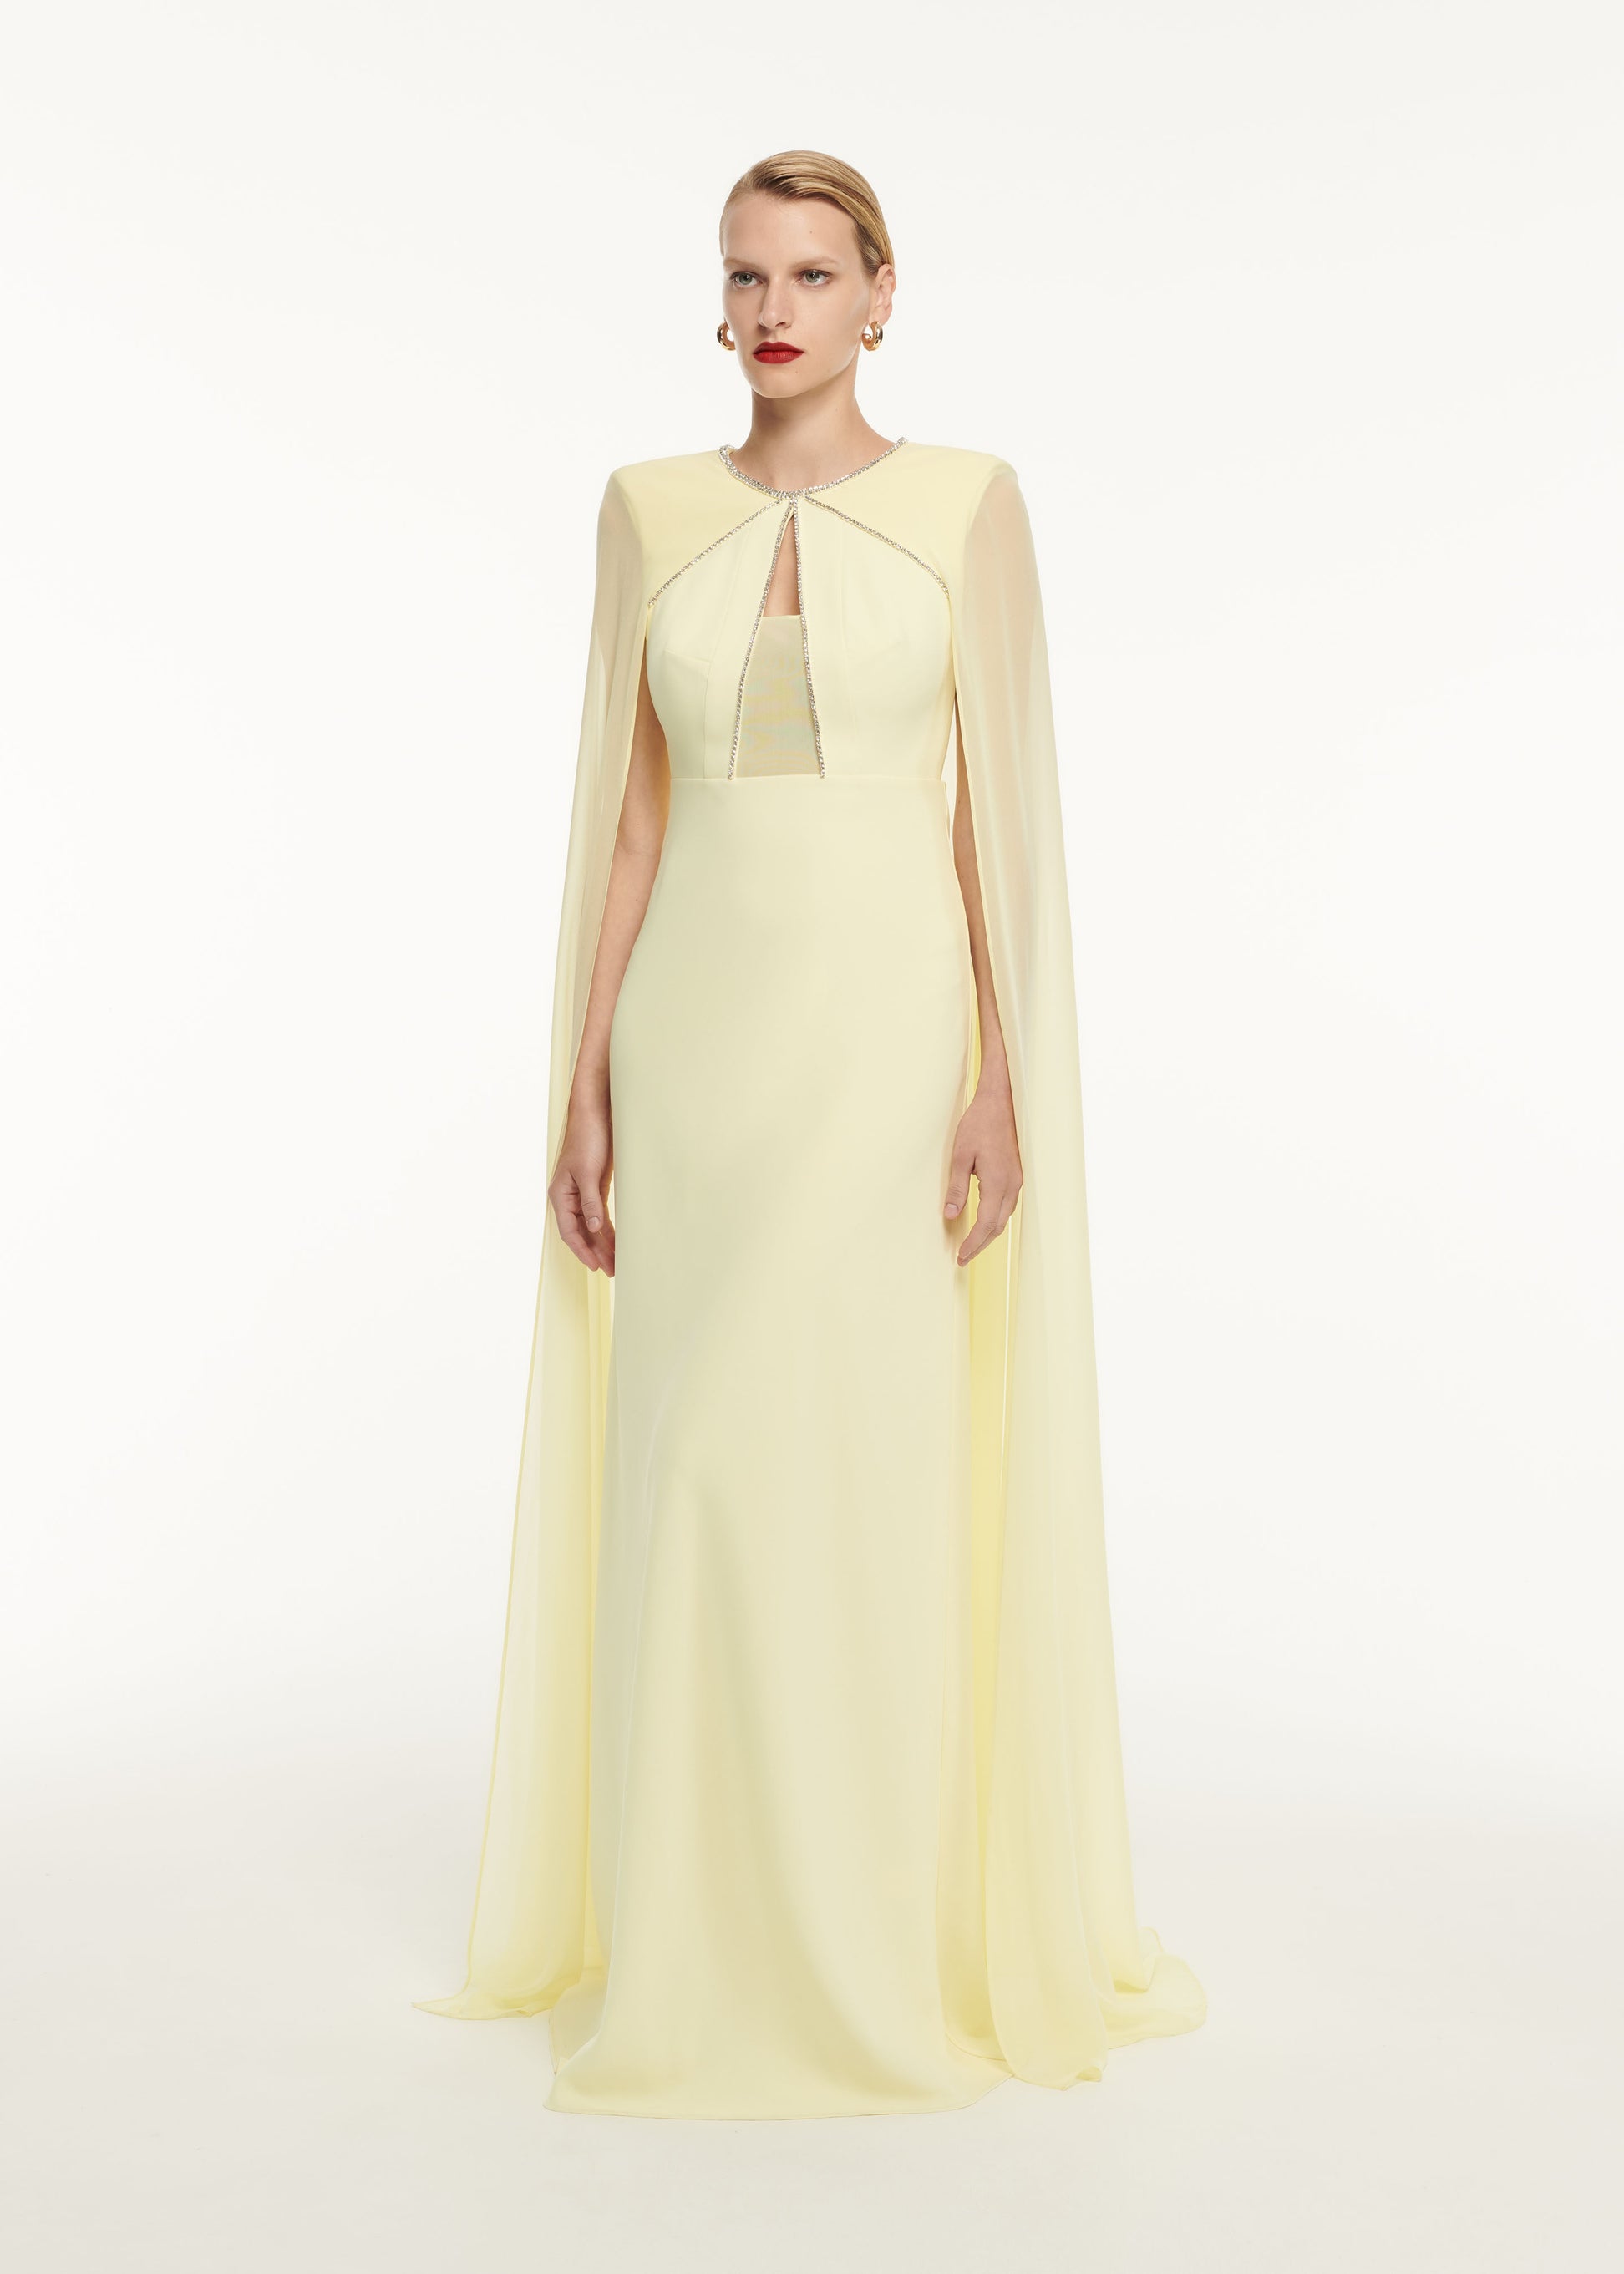 A woman wearing the Stretch Cady Gown Yellow